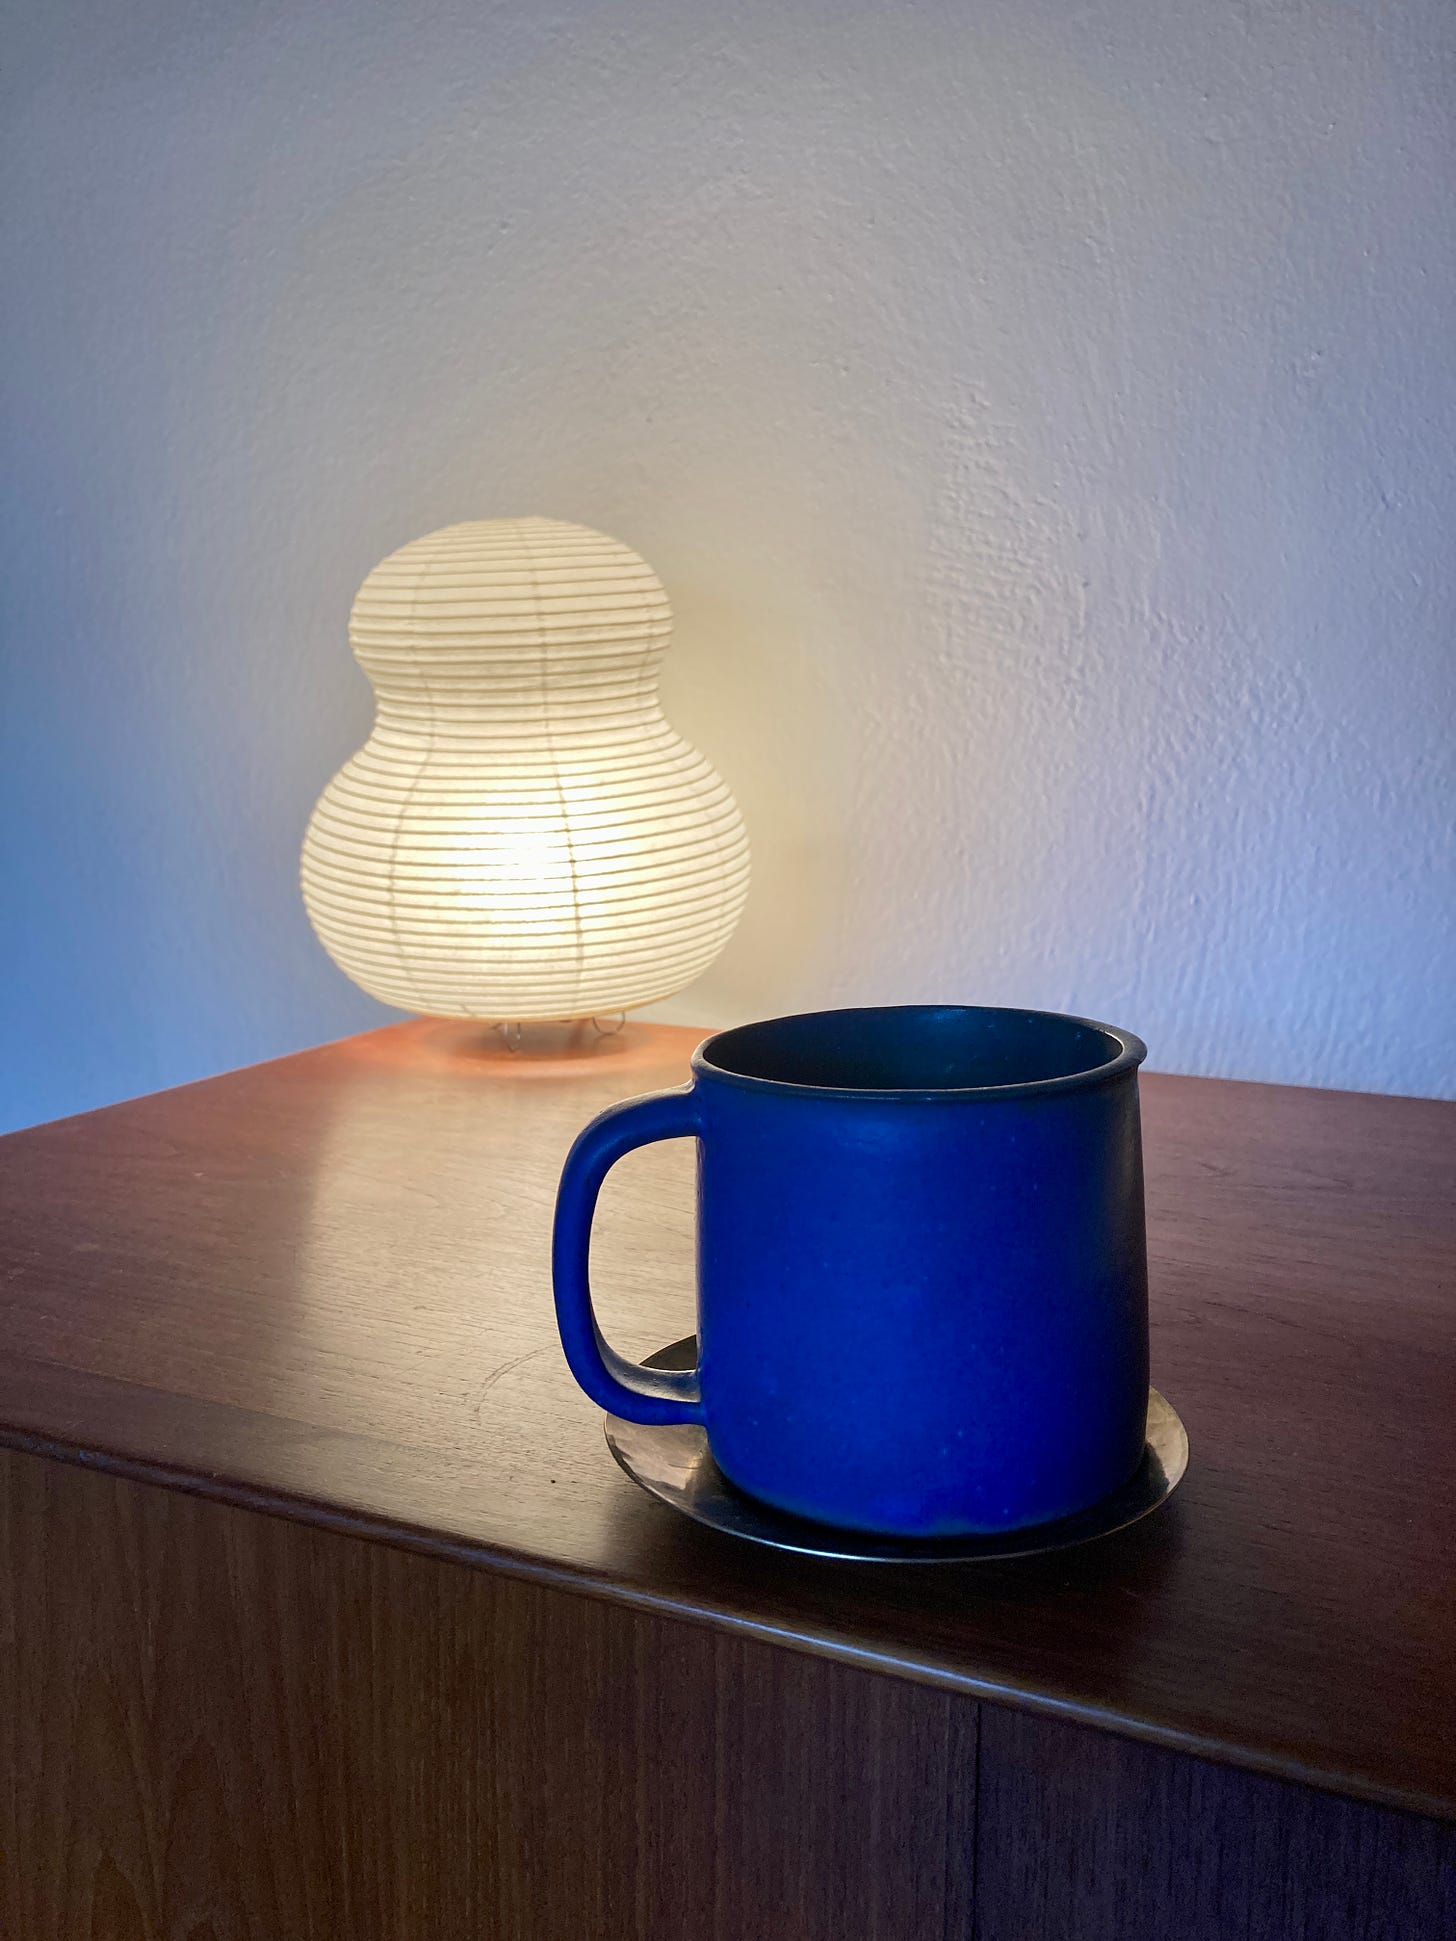 Image of a bright blue mug on a wooden credenza. A small paper lamp shines in the background.